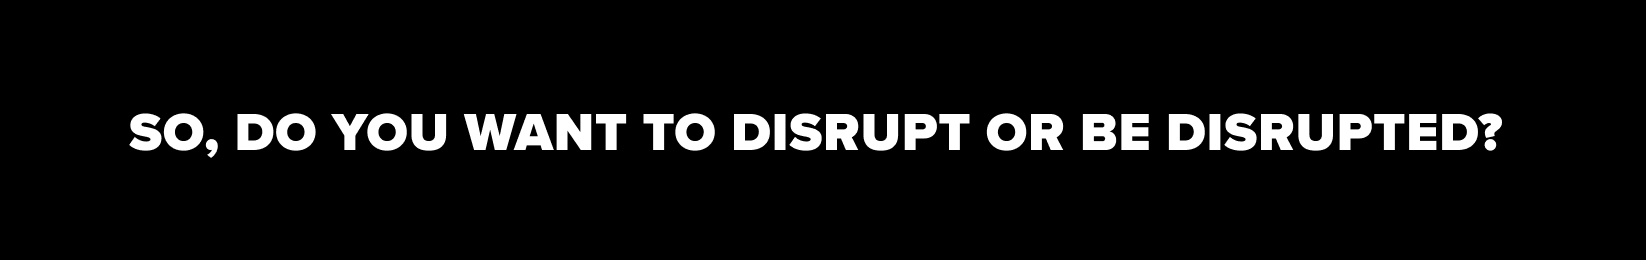 Do you want to disrupt or be disrupted?